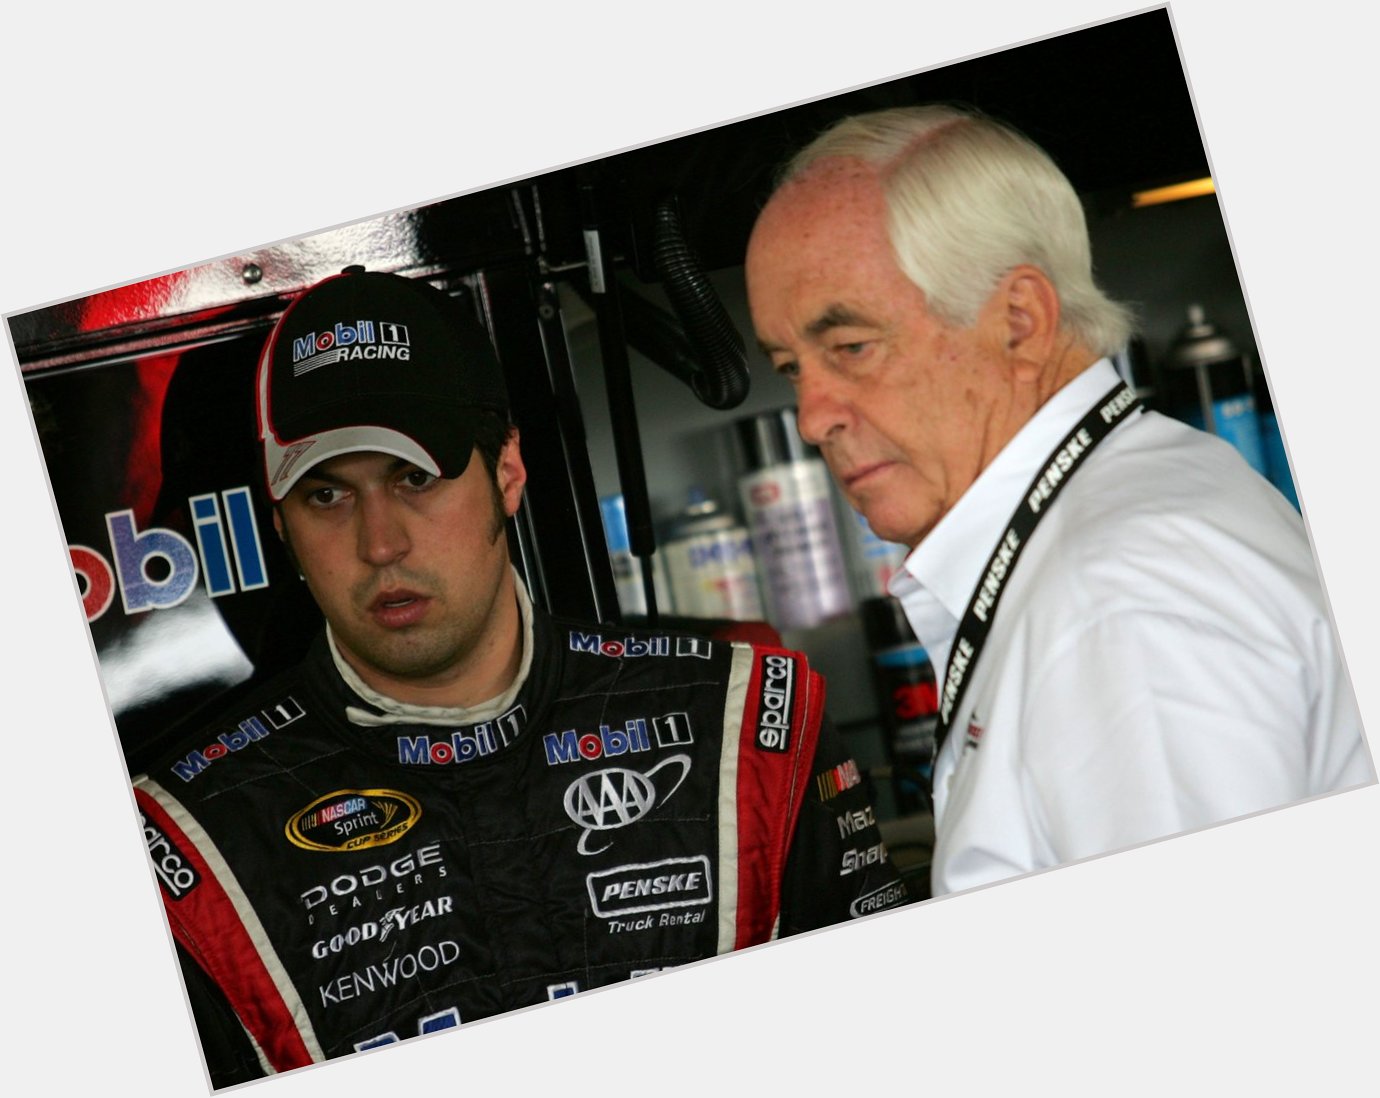 Happy Birthday to The Captain, Roger Penske! A household name at The Glen. 